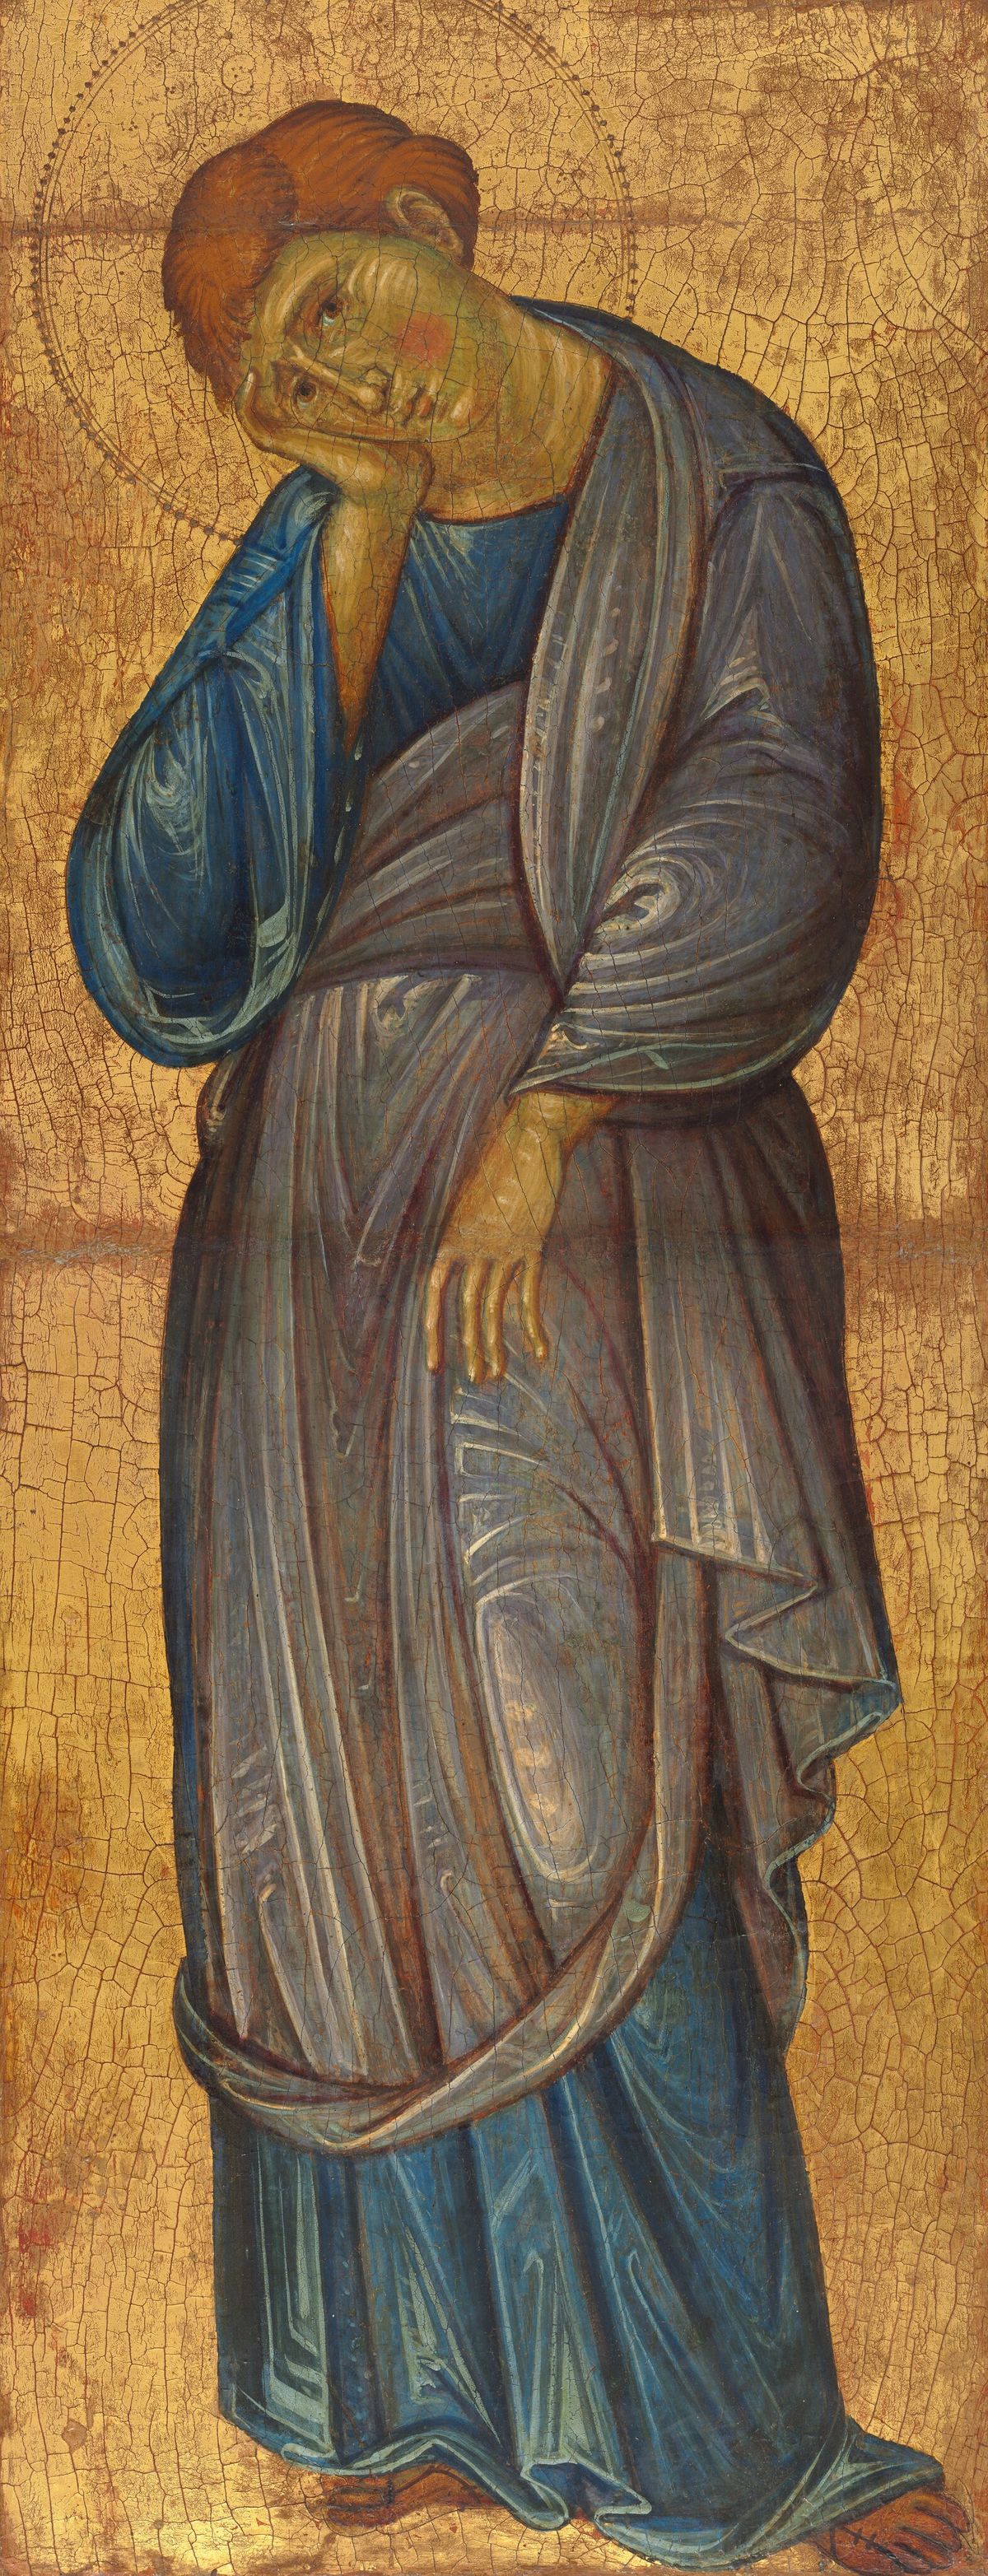 The Mourning Saint John the Evangelist by Master of the Franciscan Crucifixes (1270/1275) - Public Domain Catholic Painting